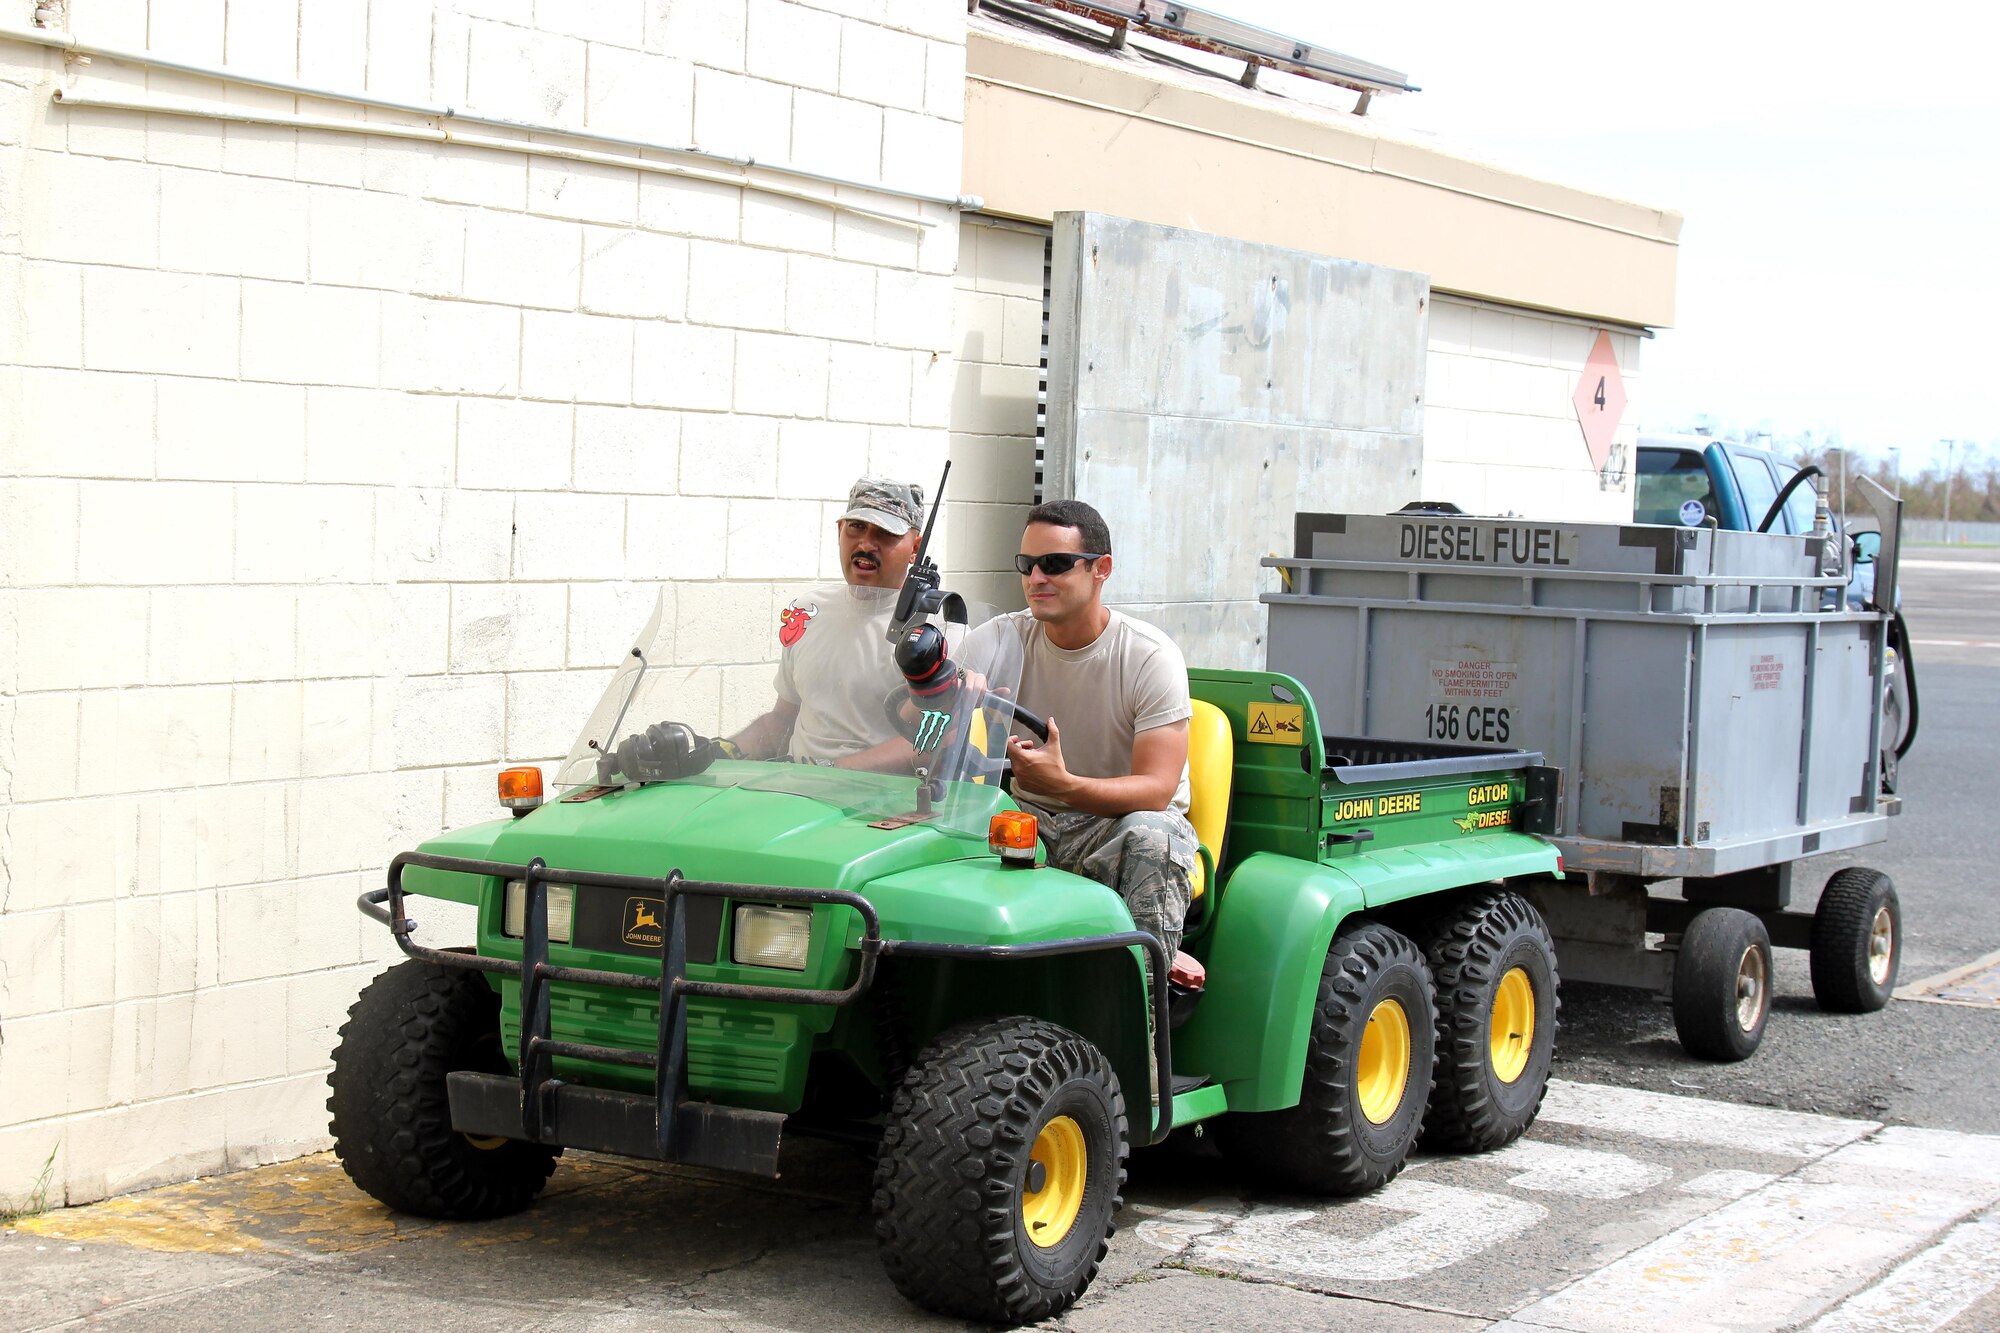 Airman 1st Class Pedro Pedraza and Staff Sgt. Carlos Arroyo travel to a generator location at Muniz Air National Guard Base, Oct. 1, 2017. The two Airmen are members of the Puerto Rico Air National Guard and are working to keep the generators running at the air base. The Puerto Rico Air National Guard is working with many federal and local agencies in response to the damage caused to Puerto Rico by Hurricane Maria, which hit the island territory on Sept. 20, 2017. (U.S. Air National Guard photo by Tech. Sgt. Dan Heaton)